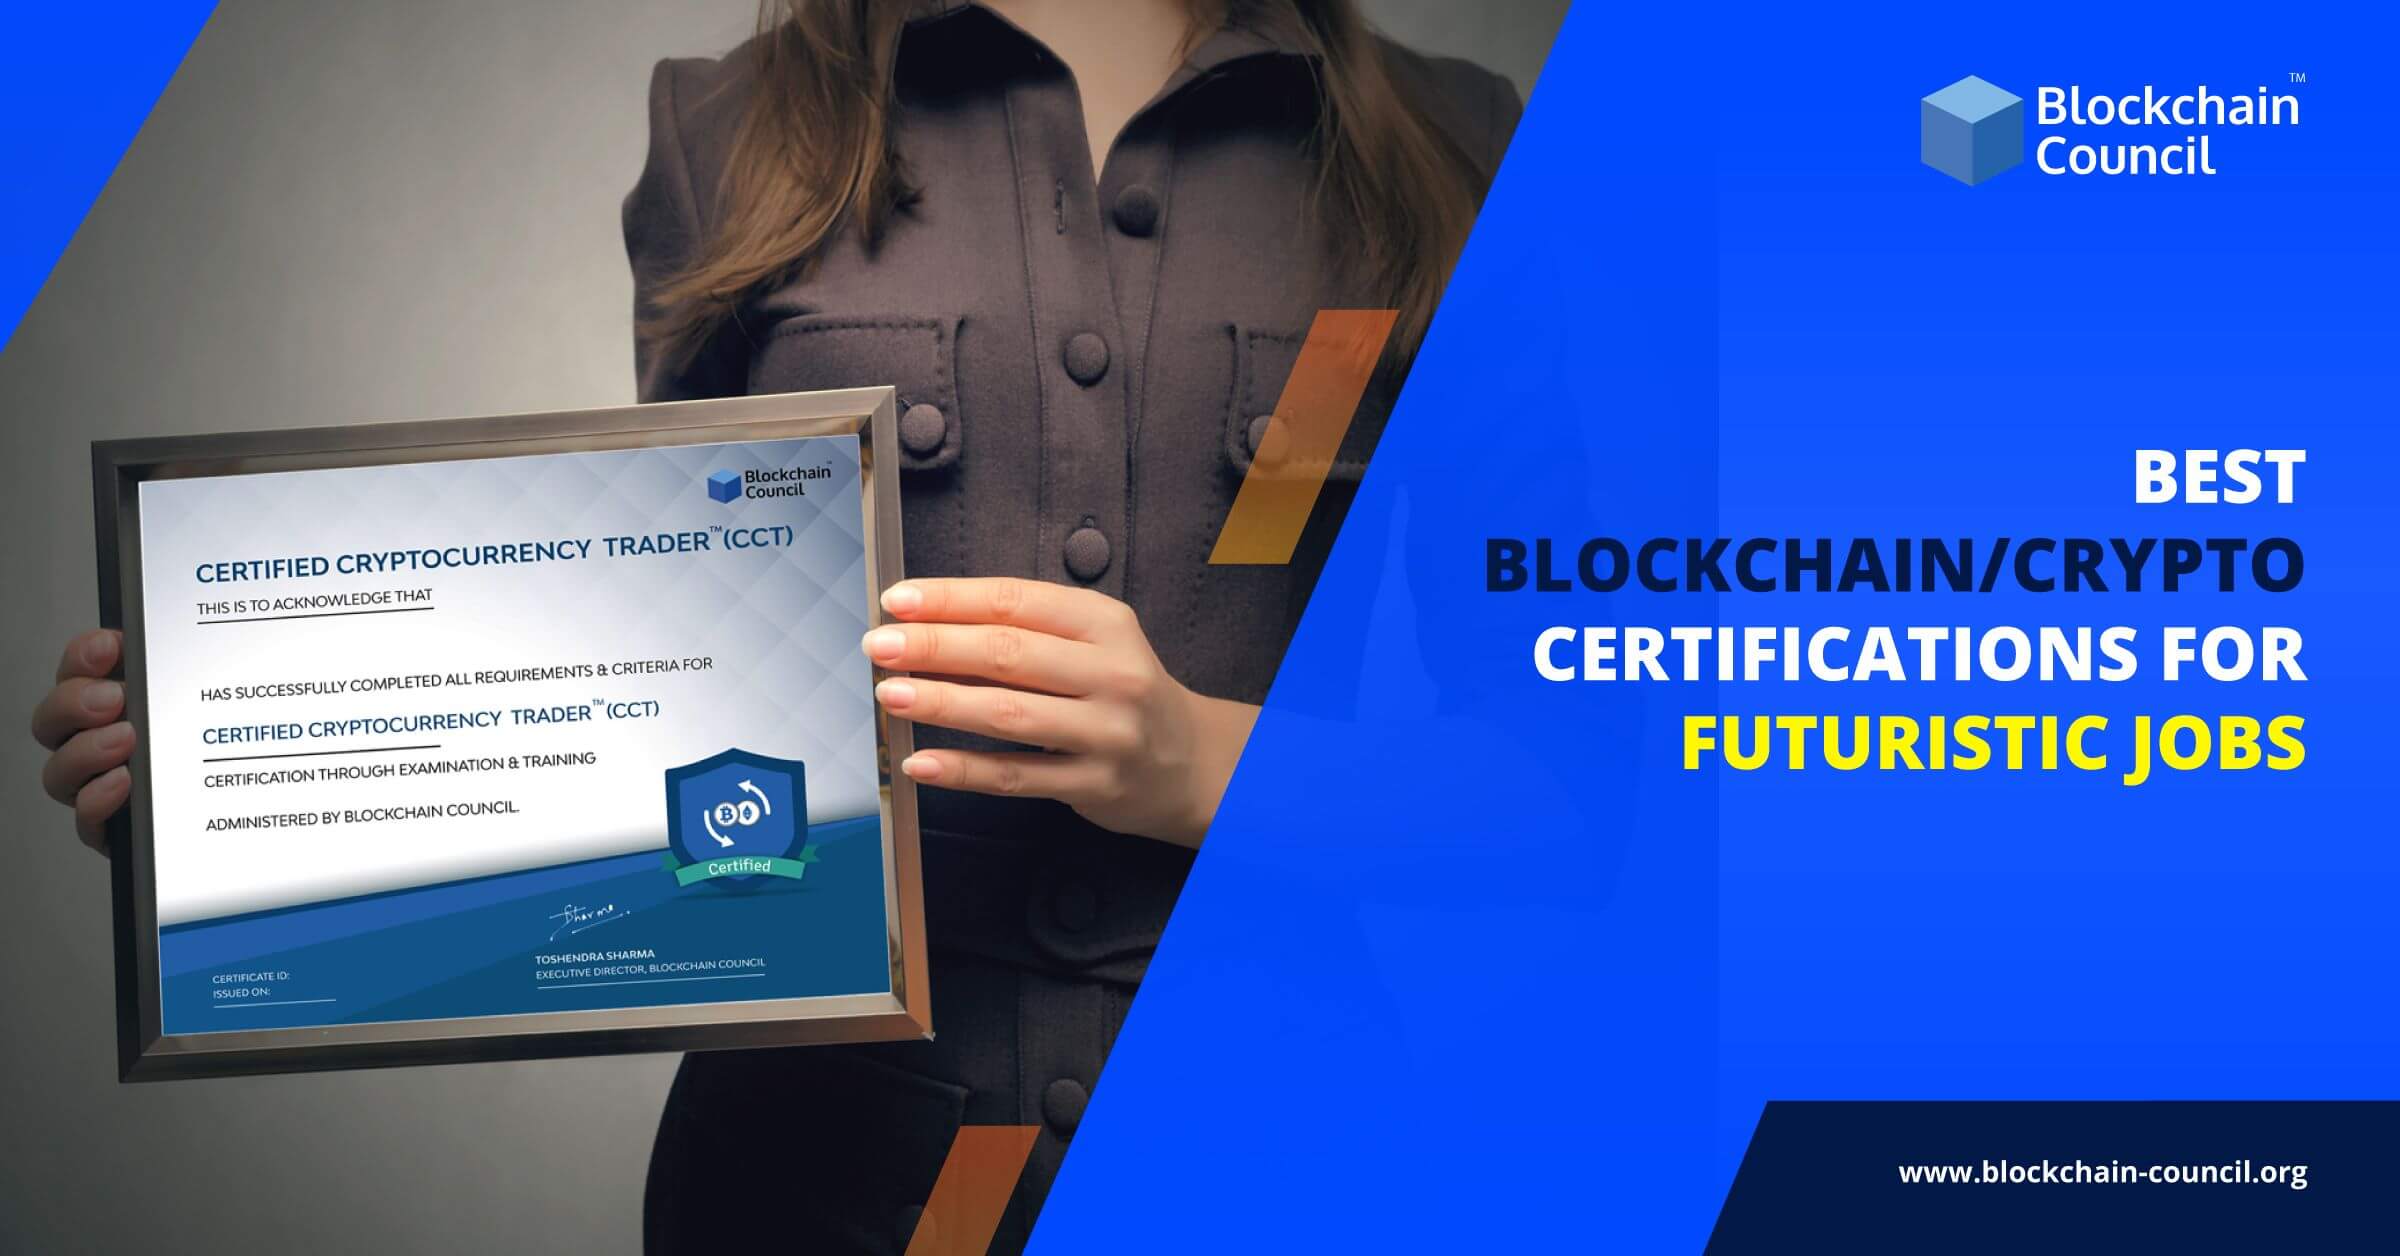 Best Blockchain/Crypto Certifications for Futuristic Jobs